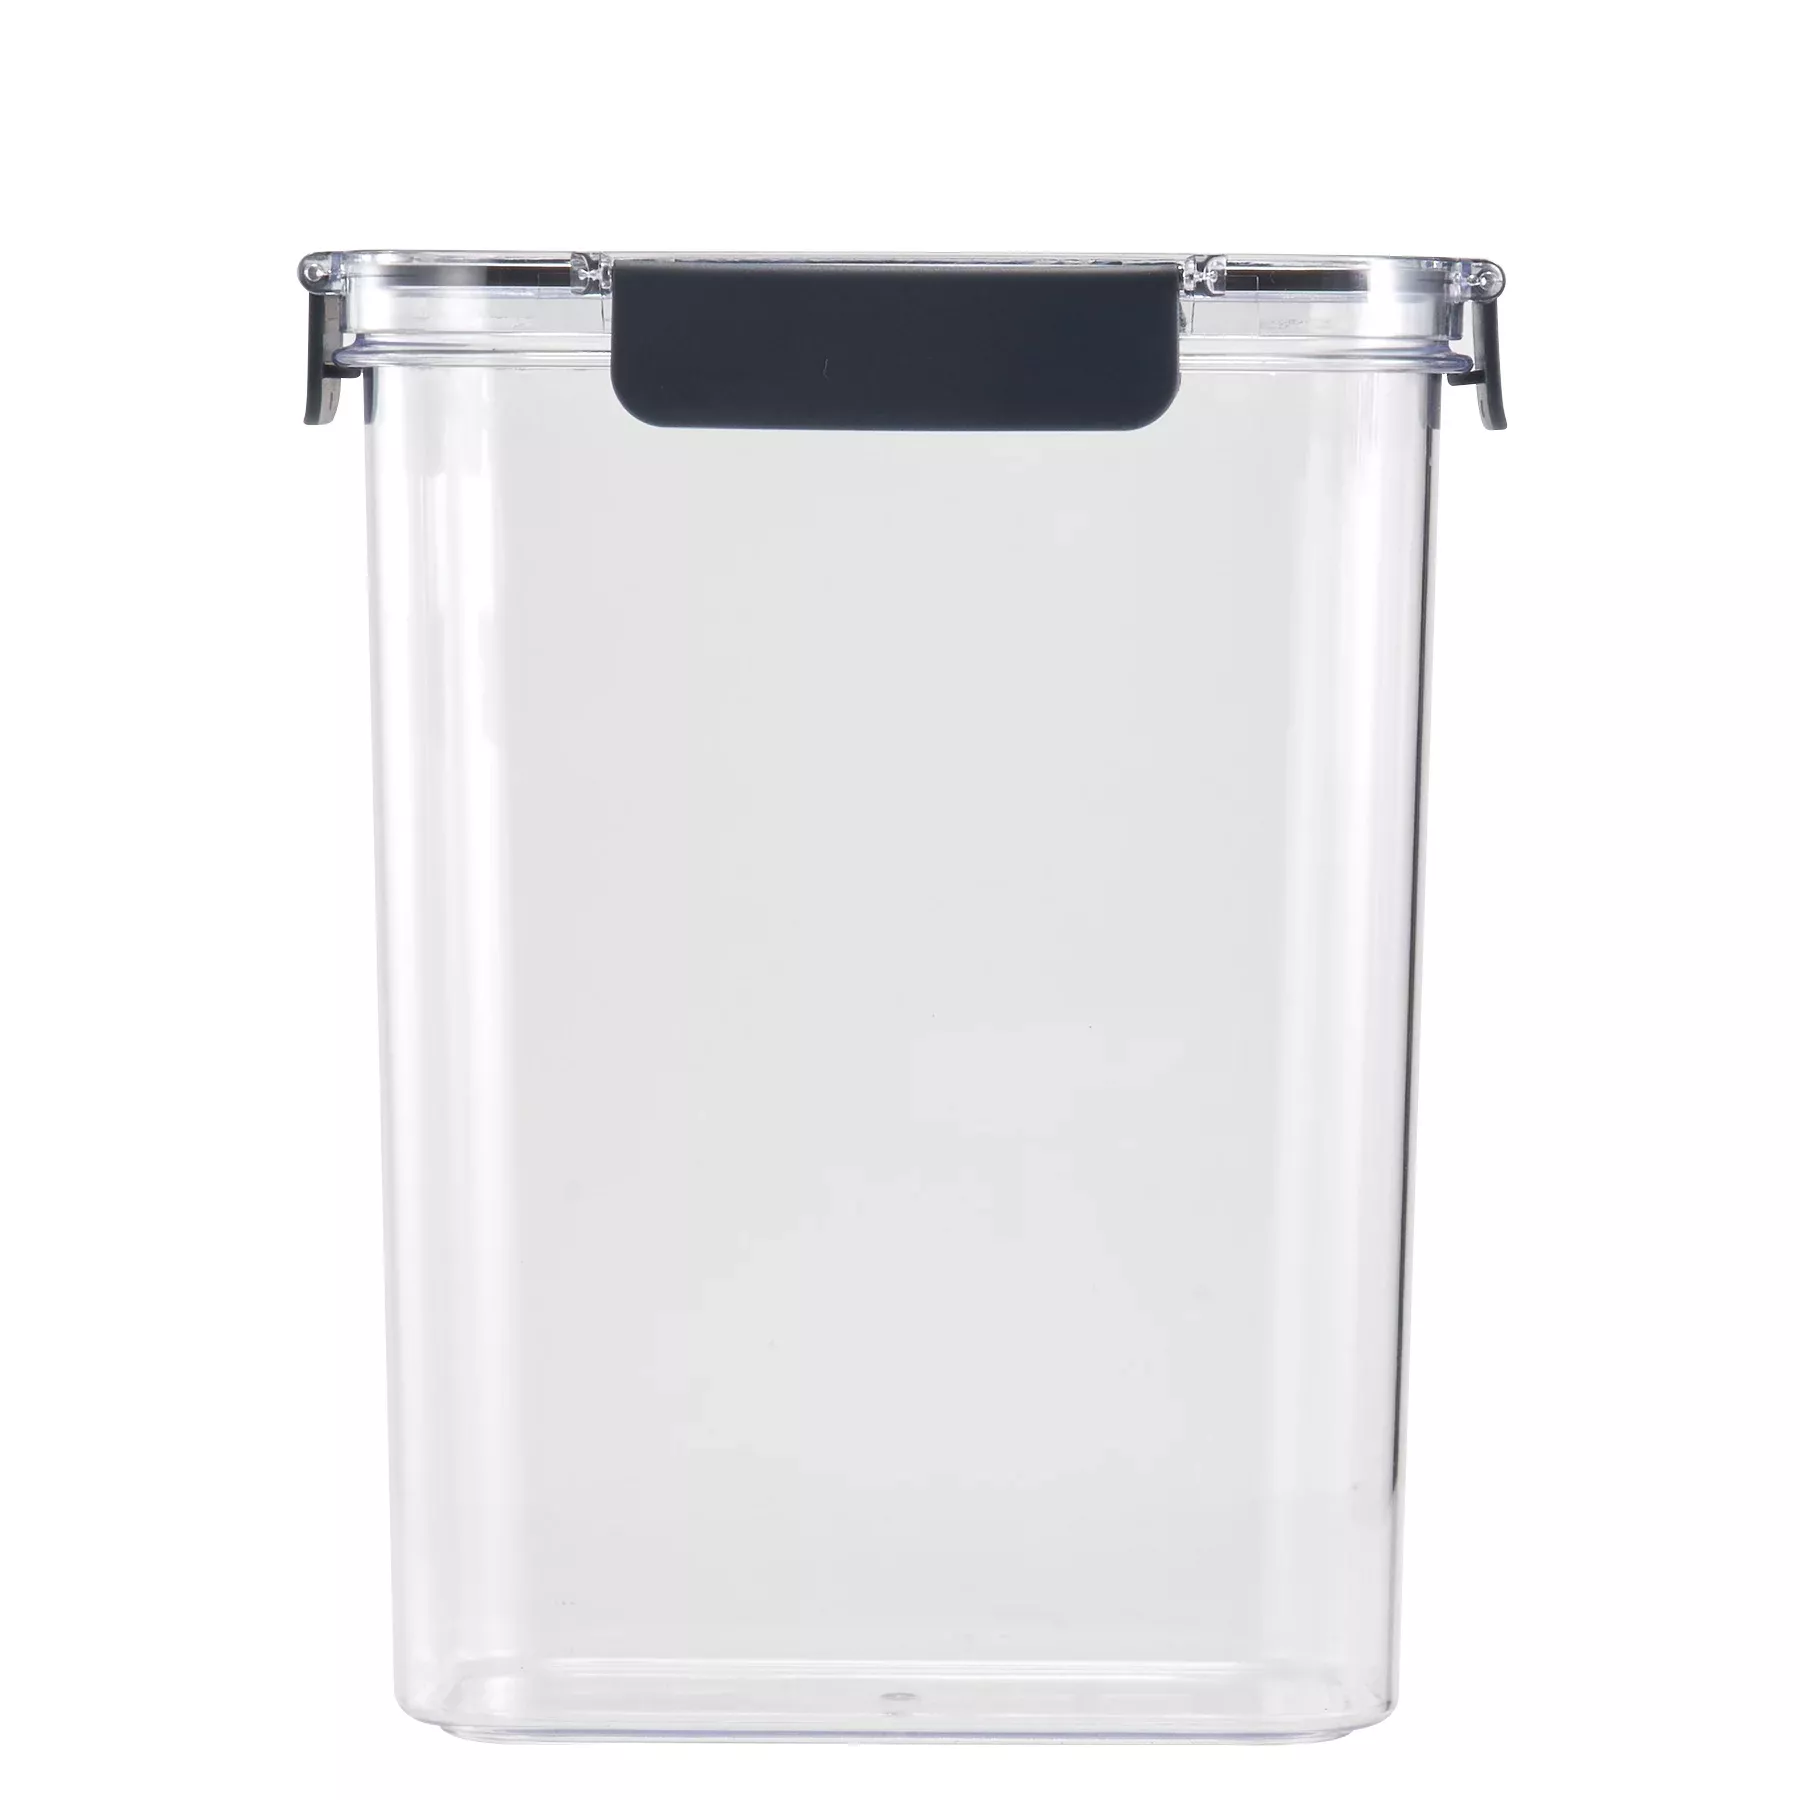 Mainstays Small Cereal Dispenser, 16 Cups - Clear Plastic, Gray Lid